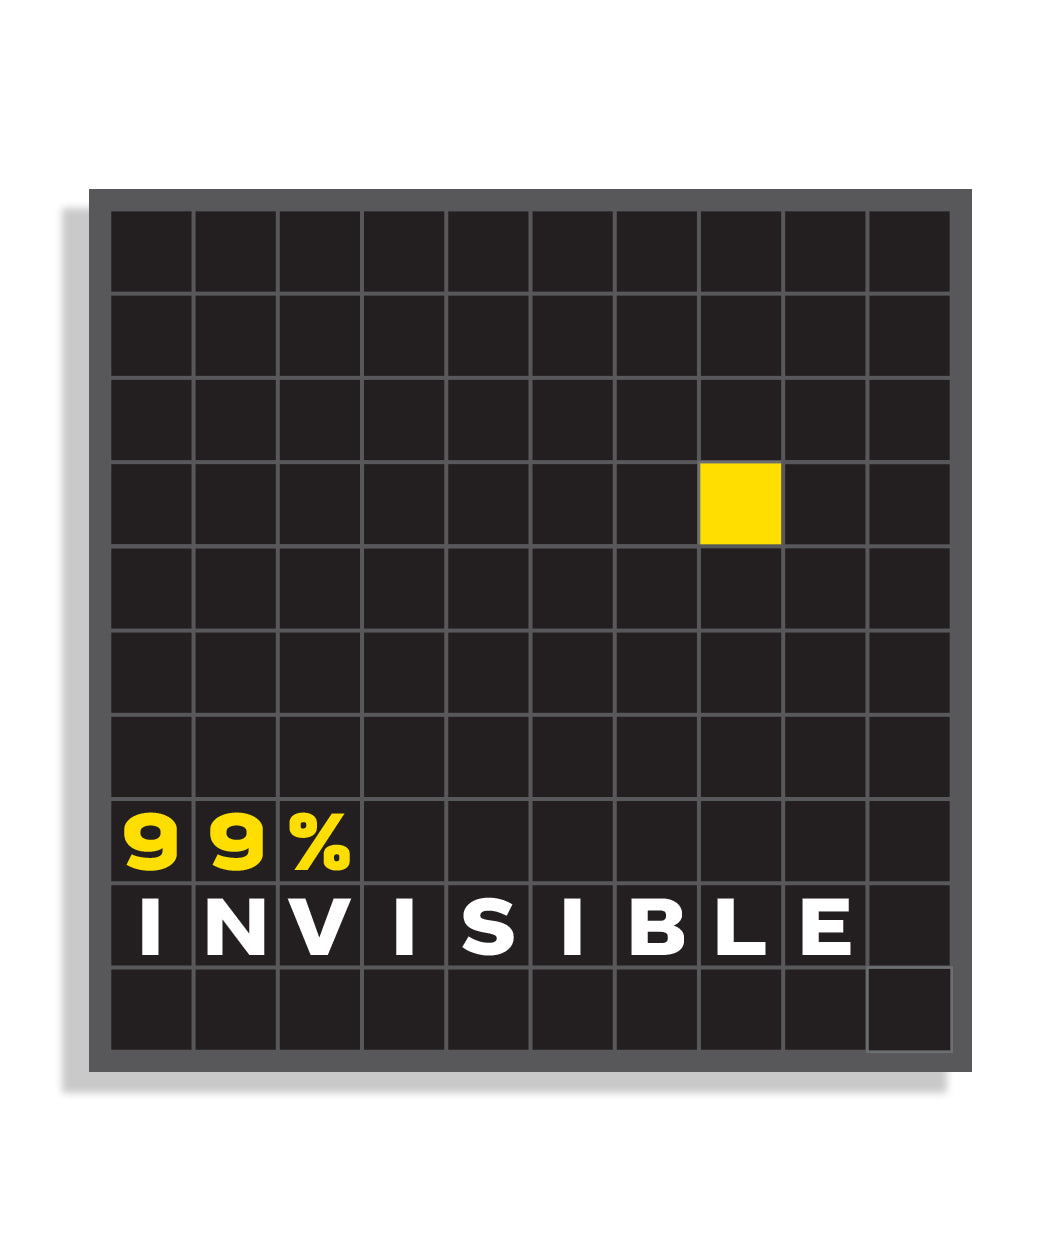 Square sticker split into a grid of all black squares except for 1 yellow square. Includes white and yellow words 